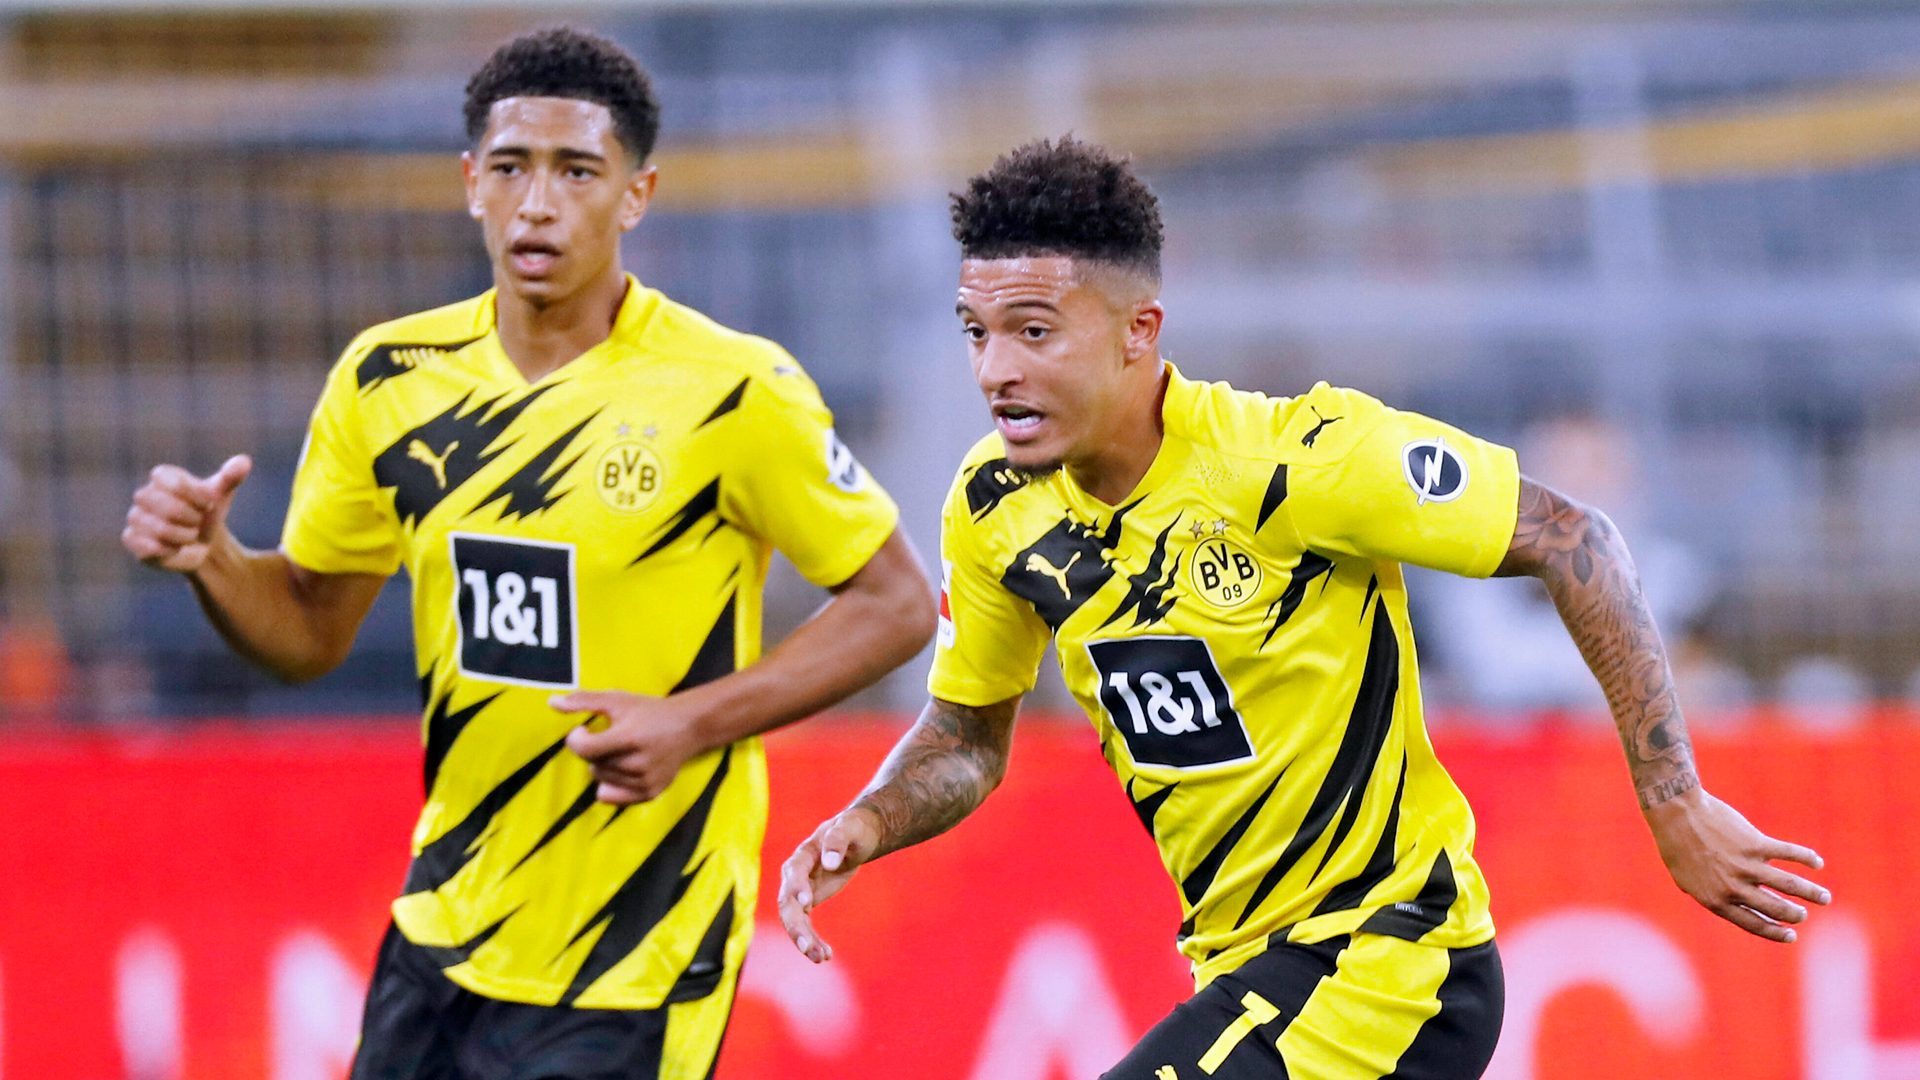 Borussia Dortmund to offer Manchester United target Jude Bellingham a new contract